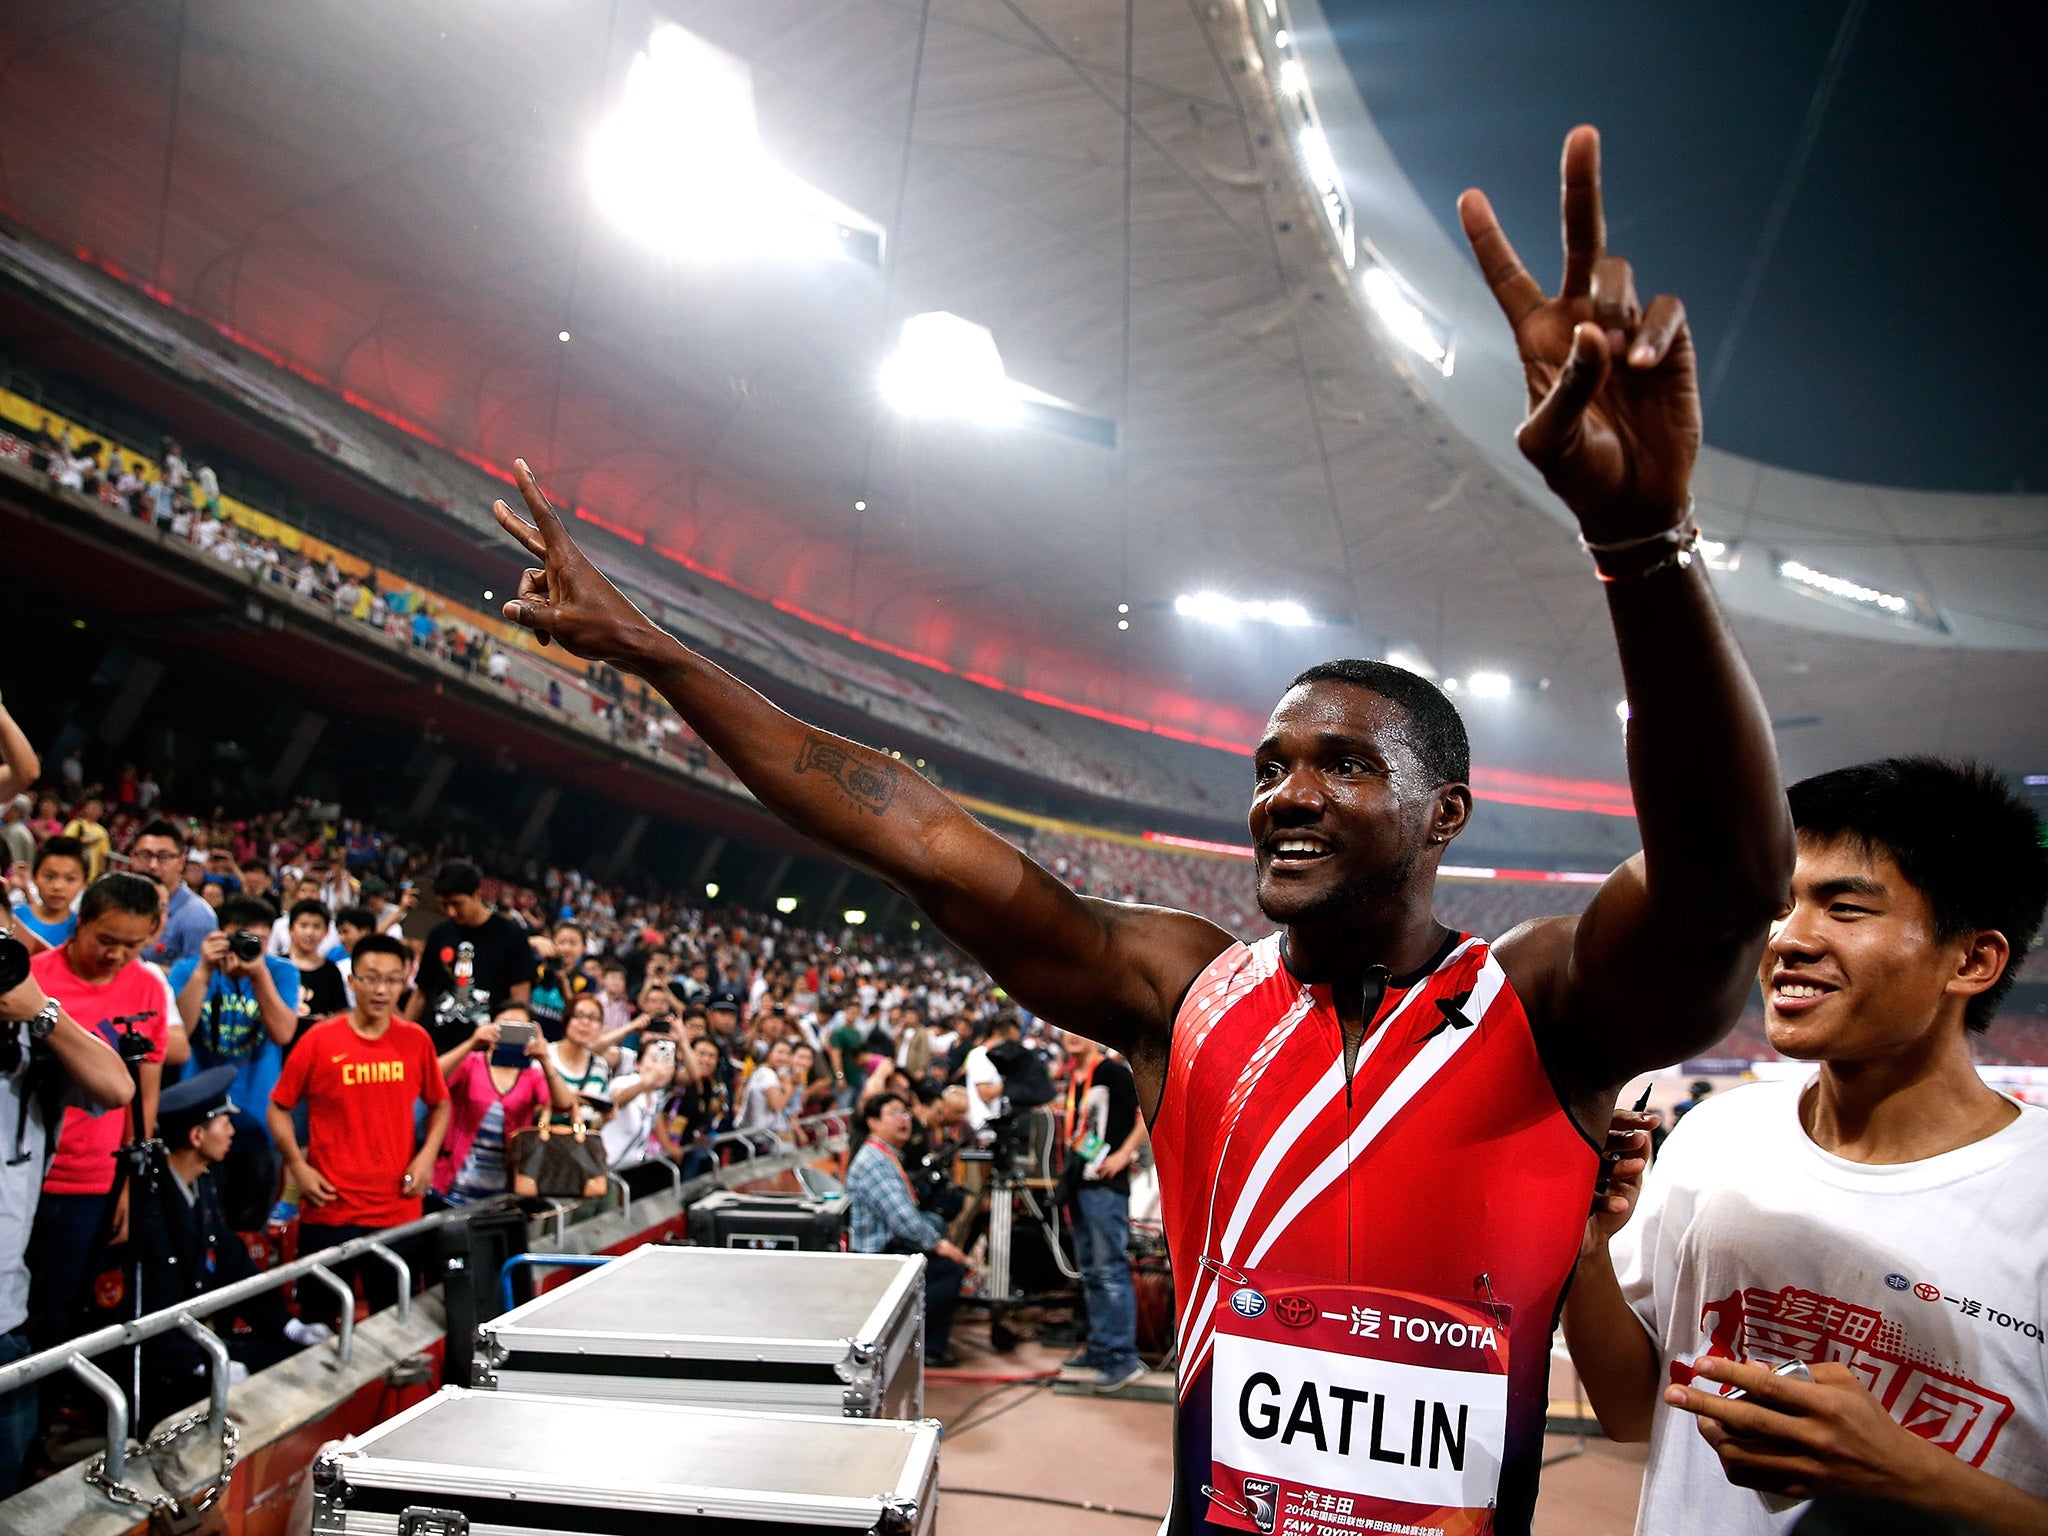 Justin Gatlin dominated the 100m last year and at 33 years old could win World gold in August